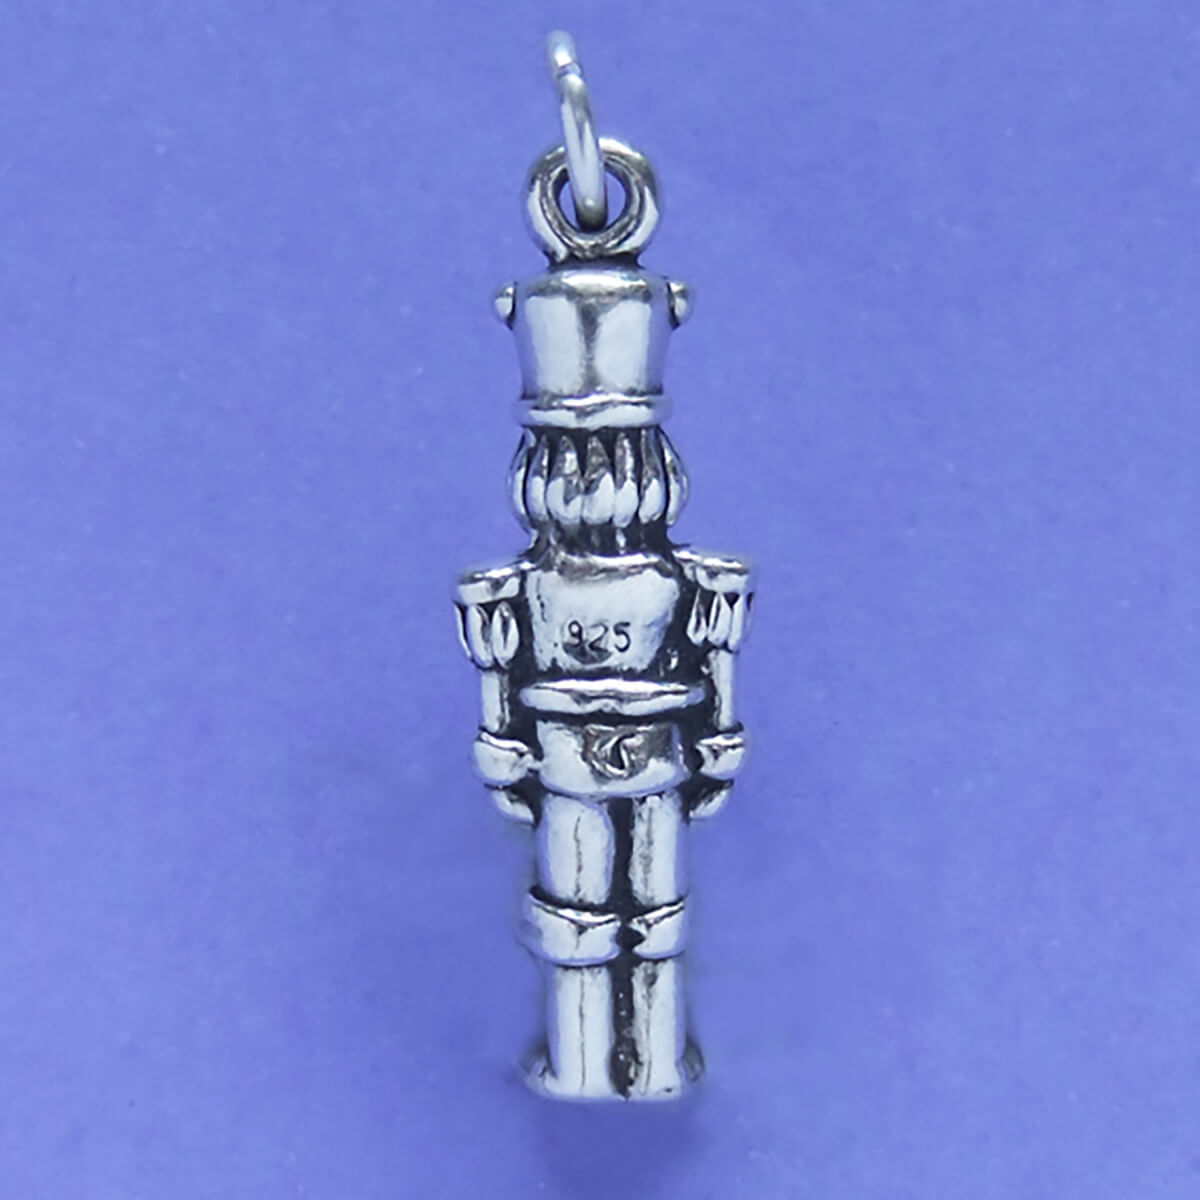 Nutcracker Toy Soldier Charm Sterling Silver Christmas Pendant